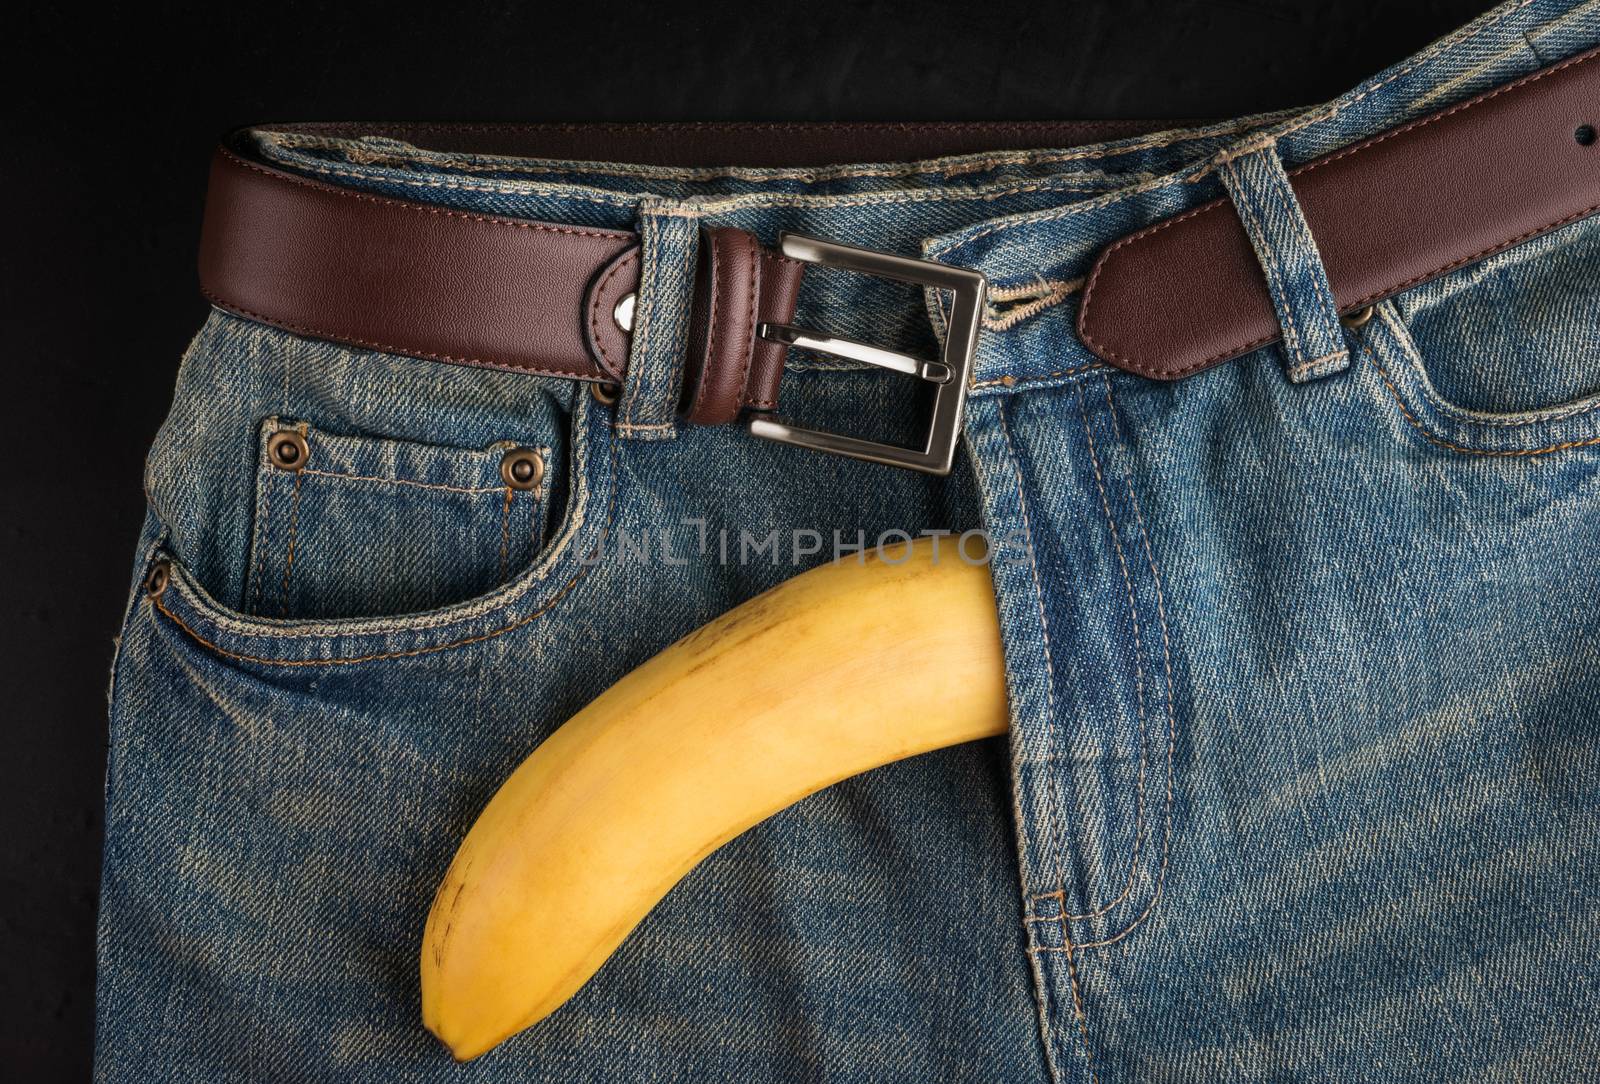 Big Banana and men's jeans, like the penis by iprachenko